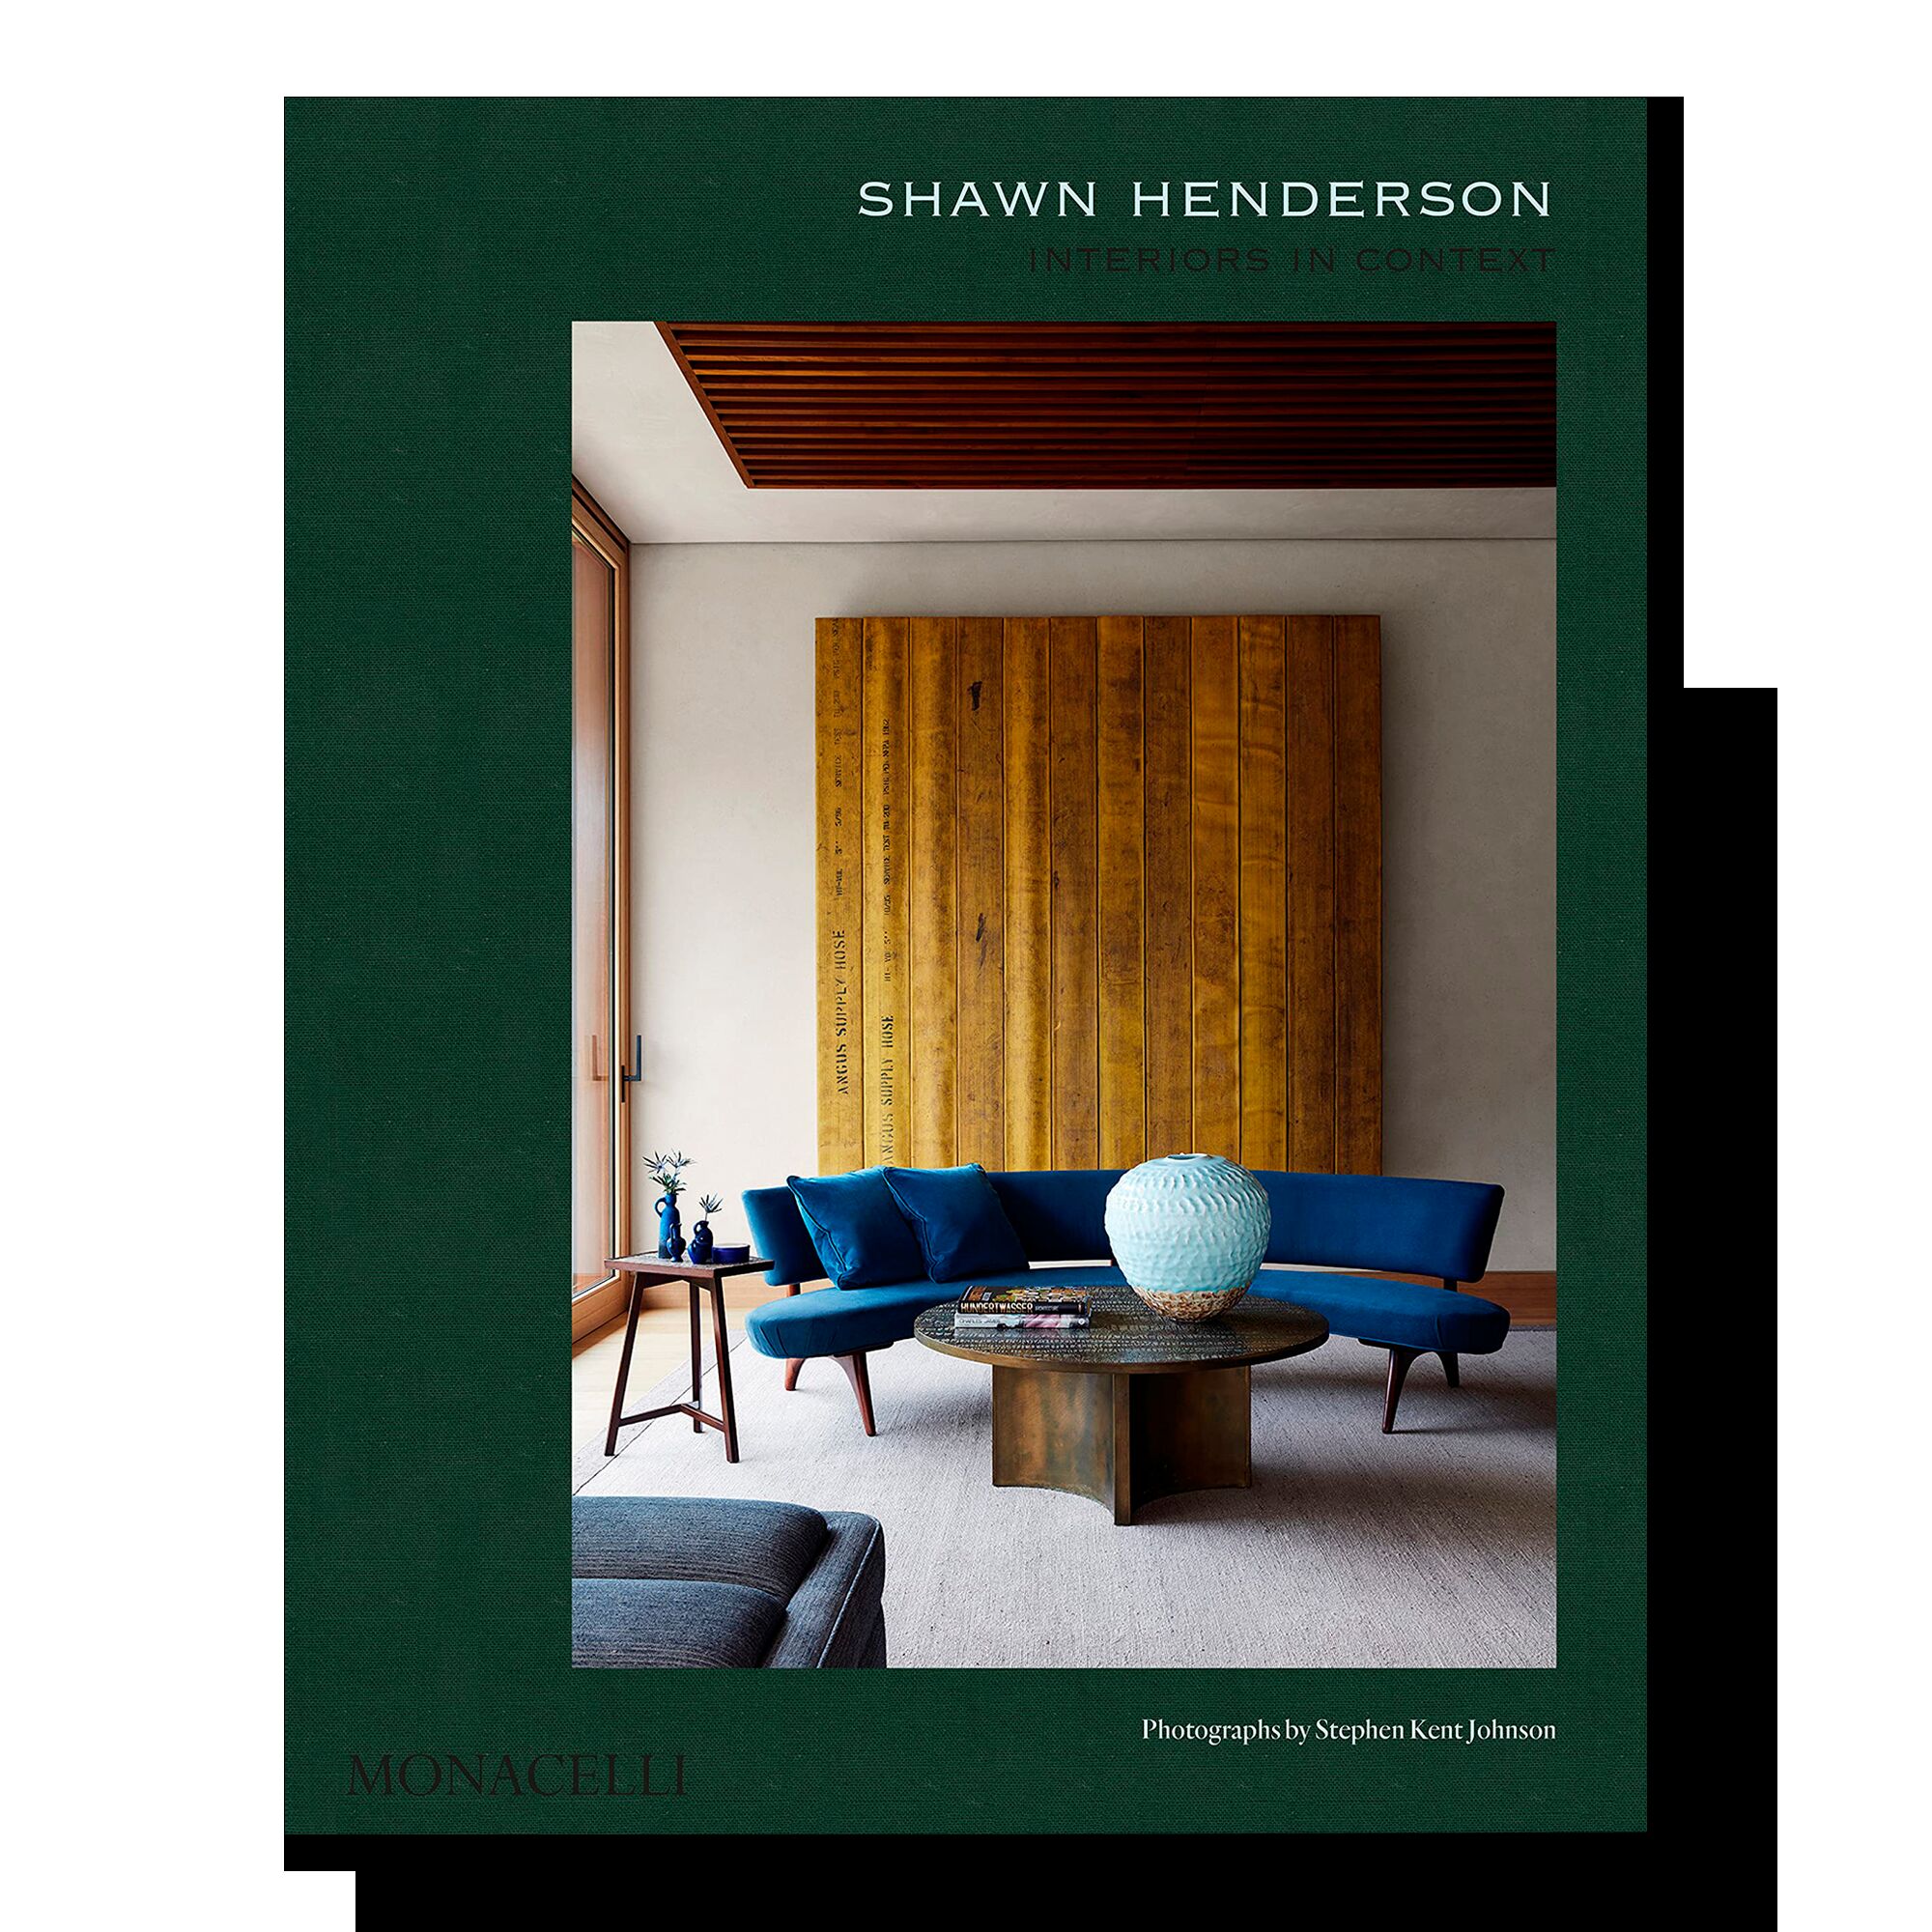 Shawn Henderson: Interiors in Context